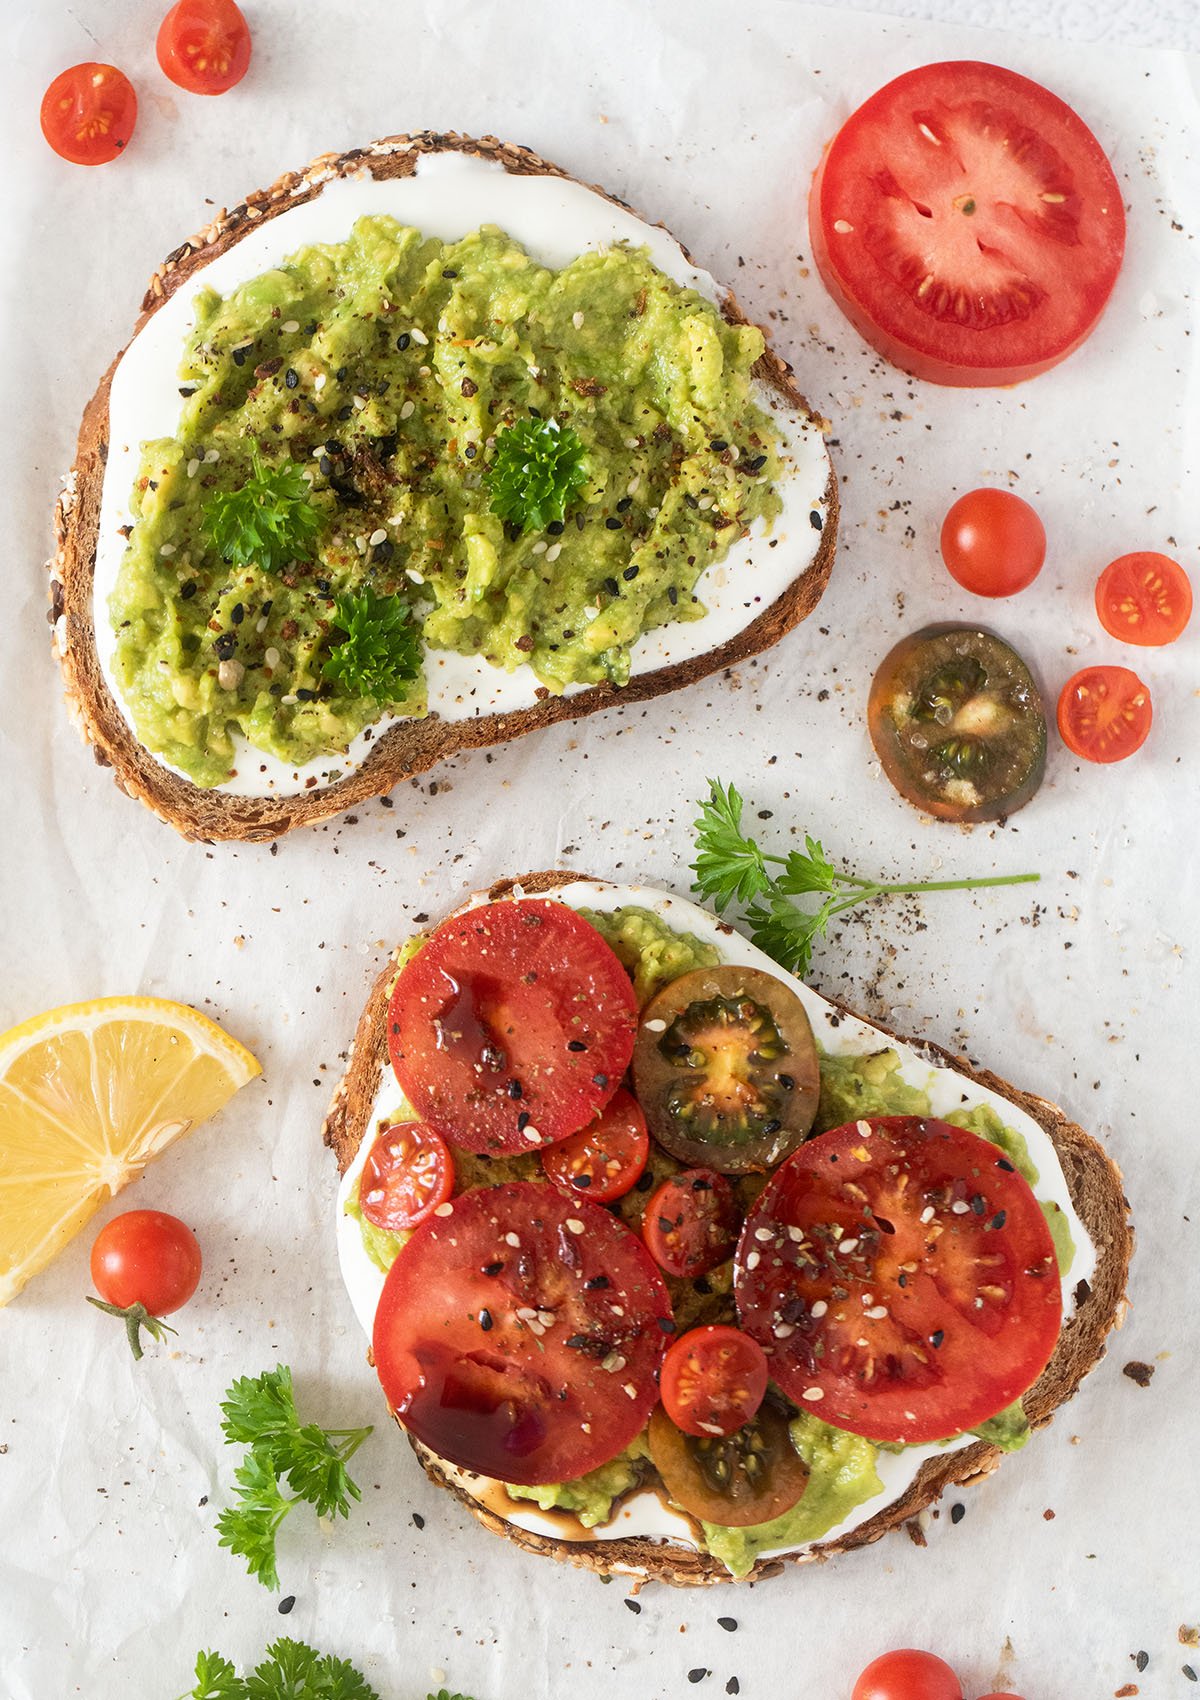 overhead view of two bread slices topped with cottage cheese and avocado and with tomato slices, small tomatoes around them.